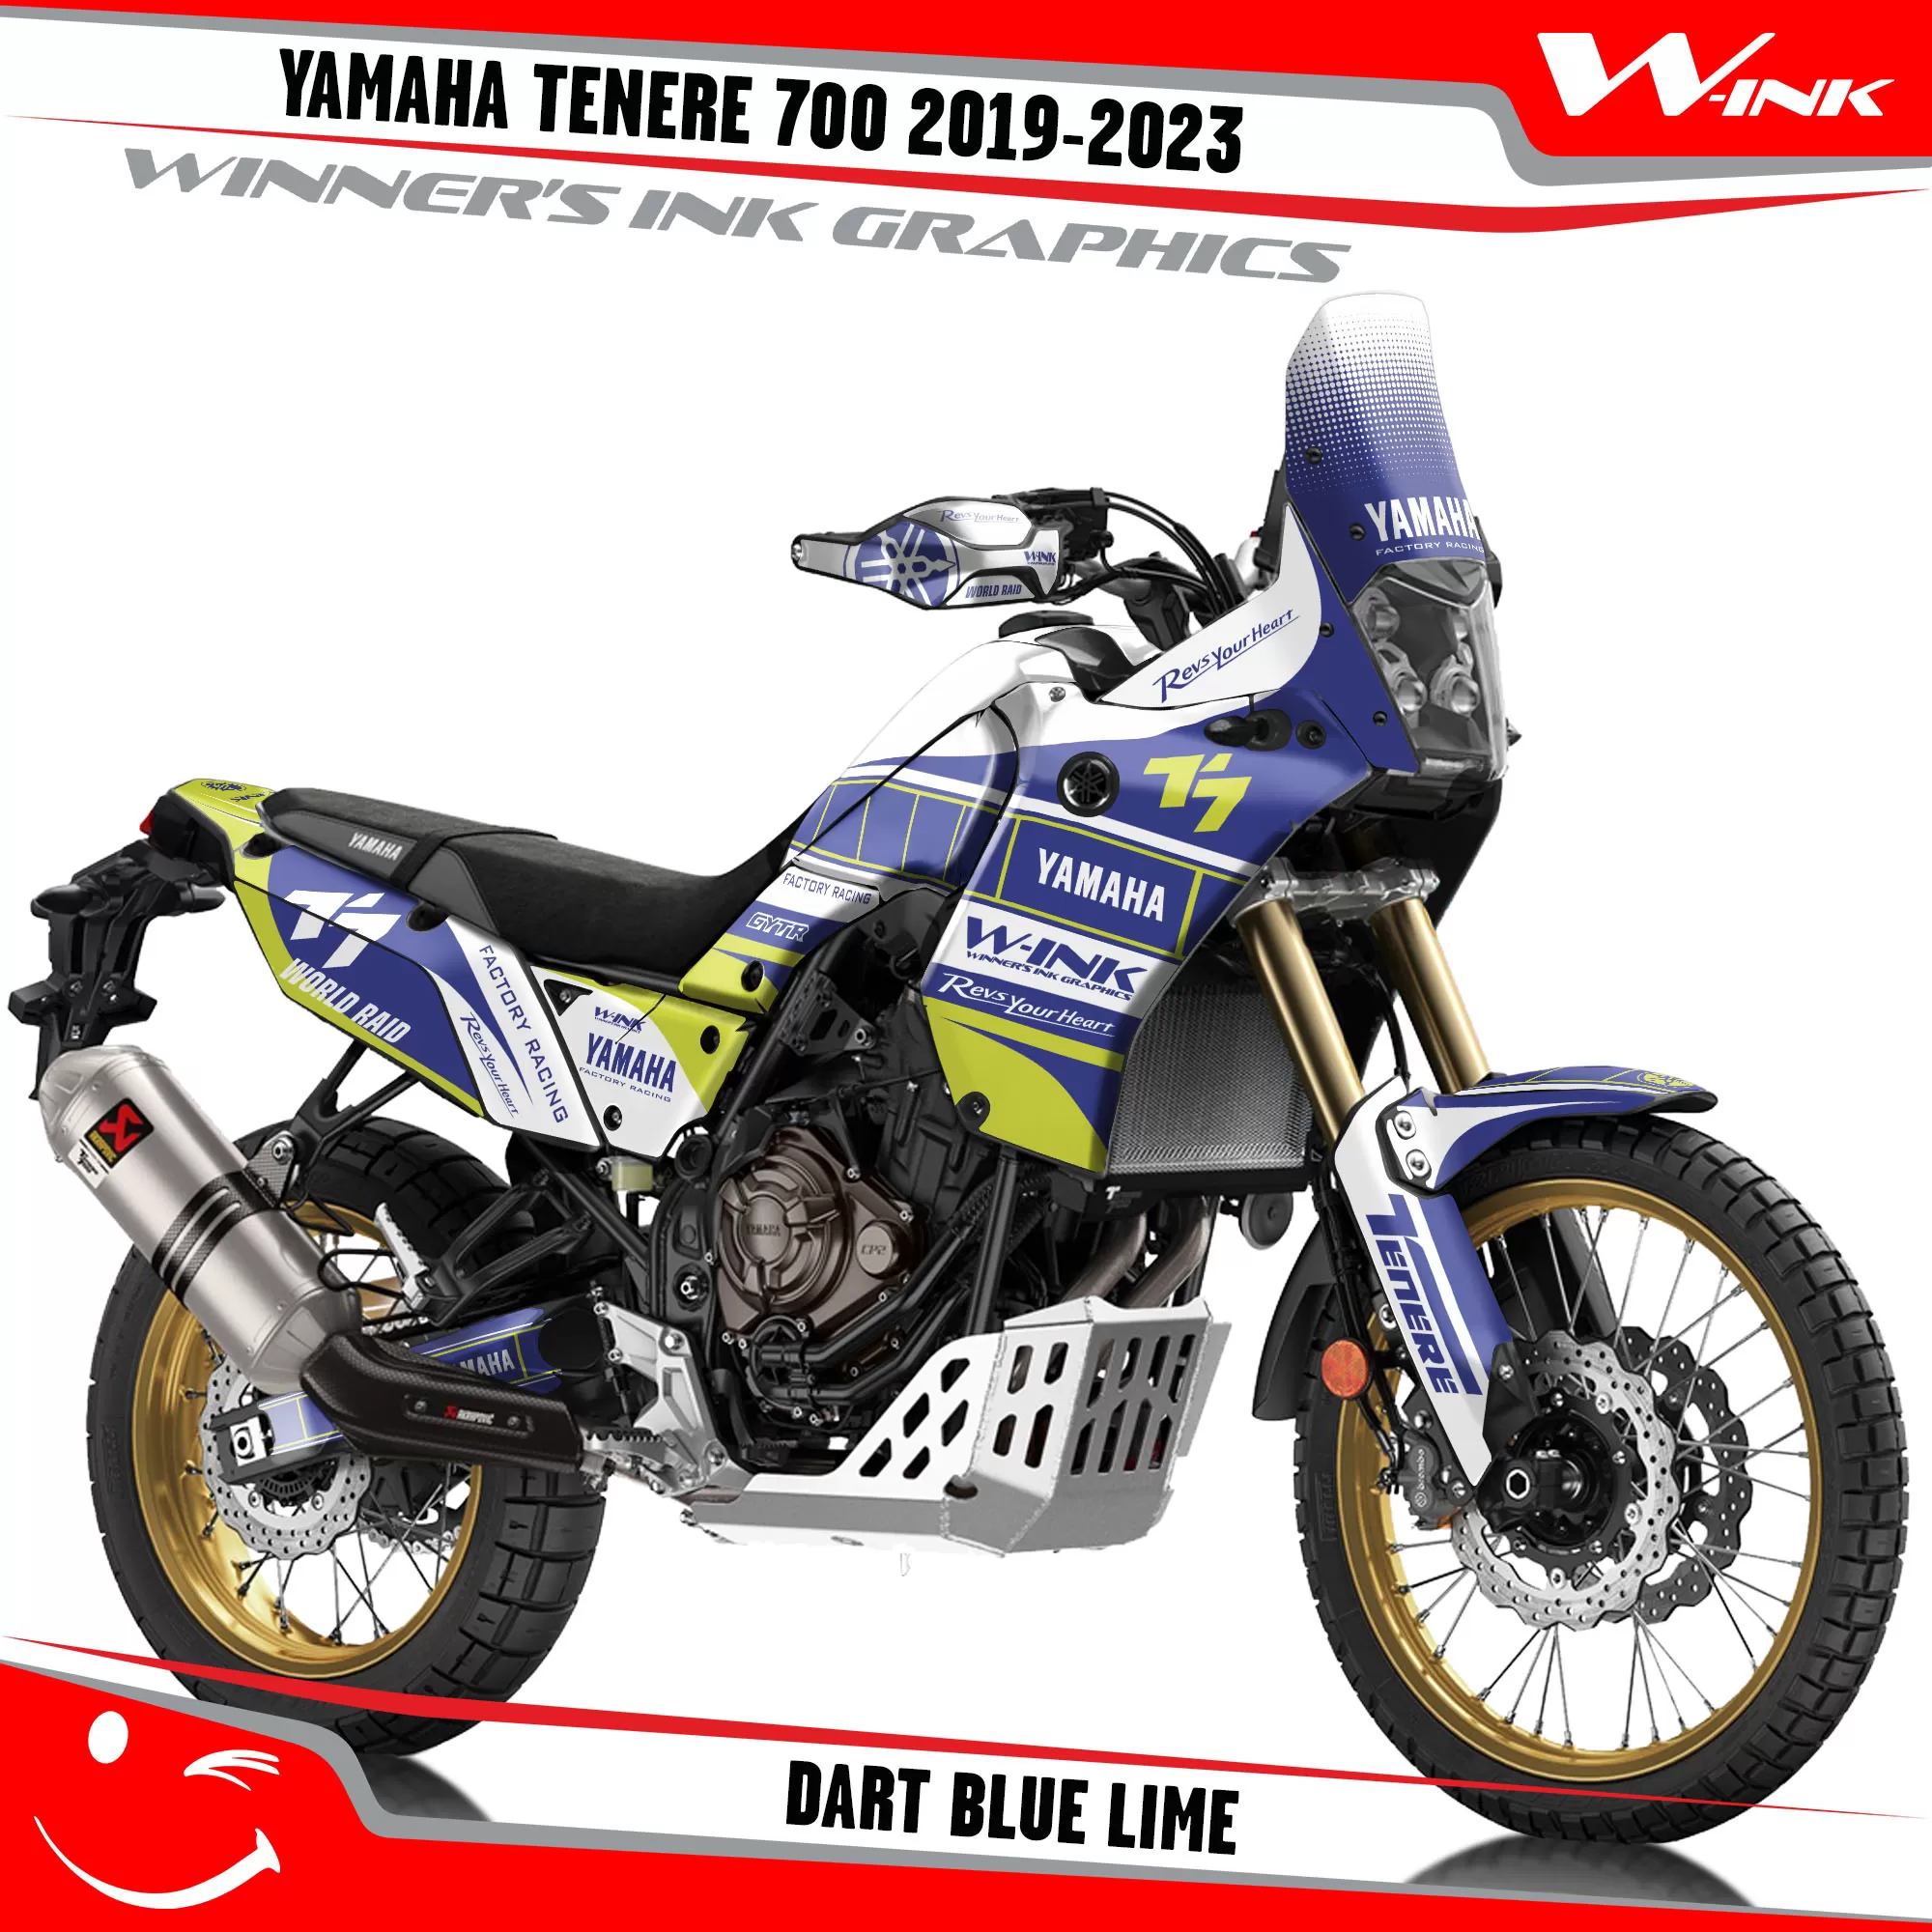 Yamaha-Tenere-700-2019-2020-2021-2022-2023-graphics-kit-and-decals-with-desing-Dart-Blue-Lime